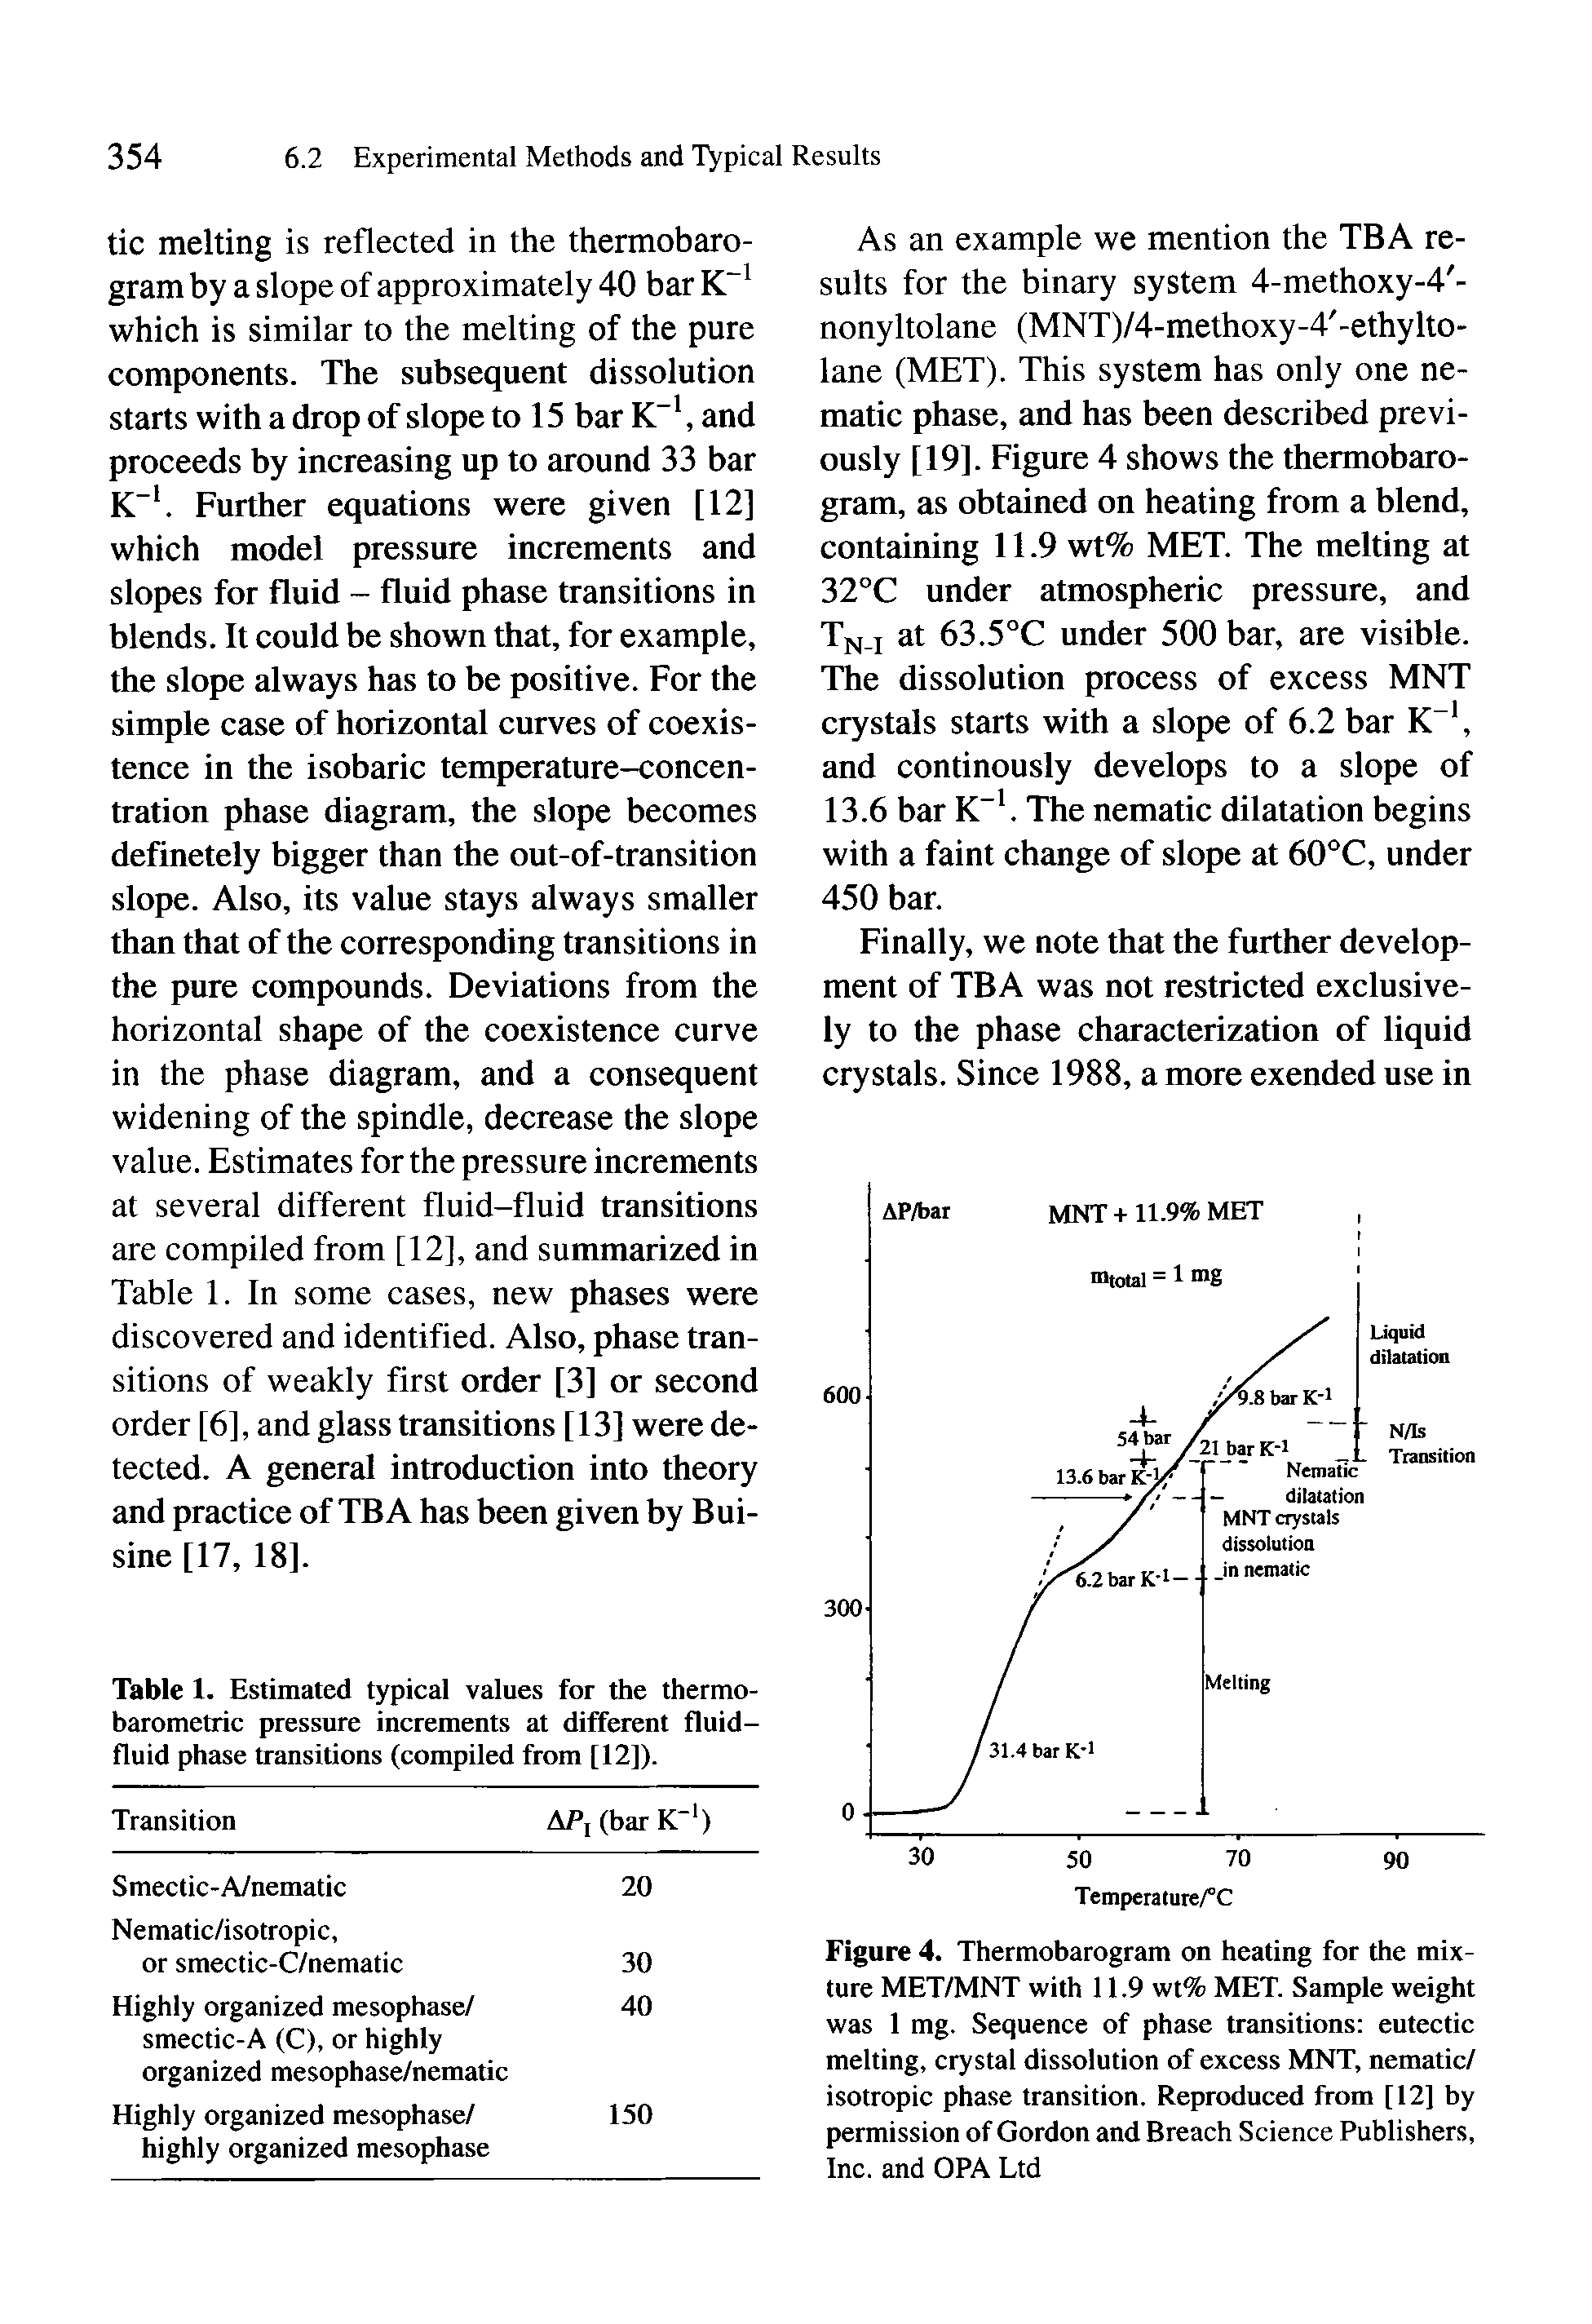 Figure 4. Thermobarogram on heating for the mixture MET/MNT with 11.9 wt% MET. Sample weight was 1 mg. Sequence of phase transitions eutectic melting, crystal dissolution of excess MNT, nematic/ isotropic phase transition. Reproduced from [12] by permission of Gordon and Breach Science Publishers, Inc. and OPA Ltd...